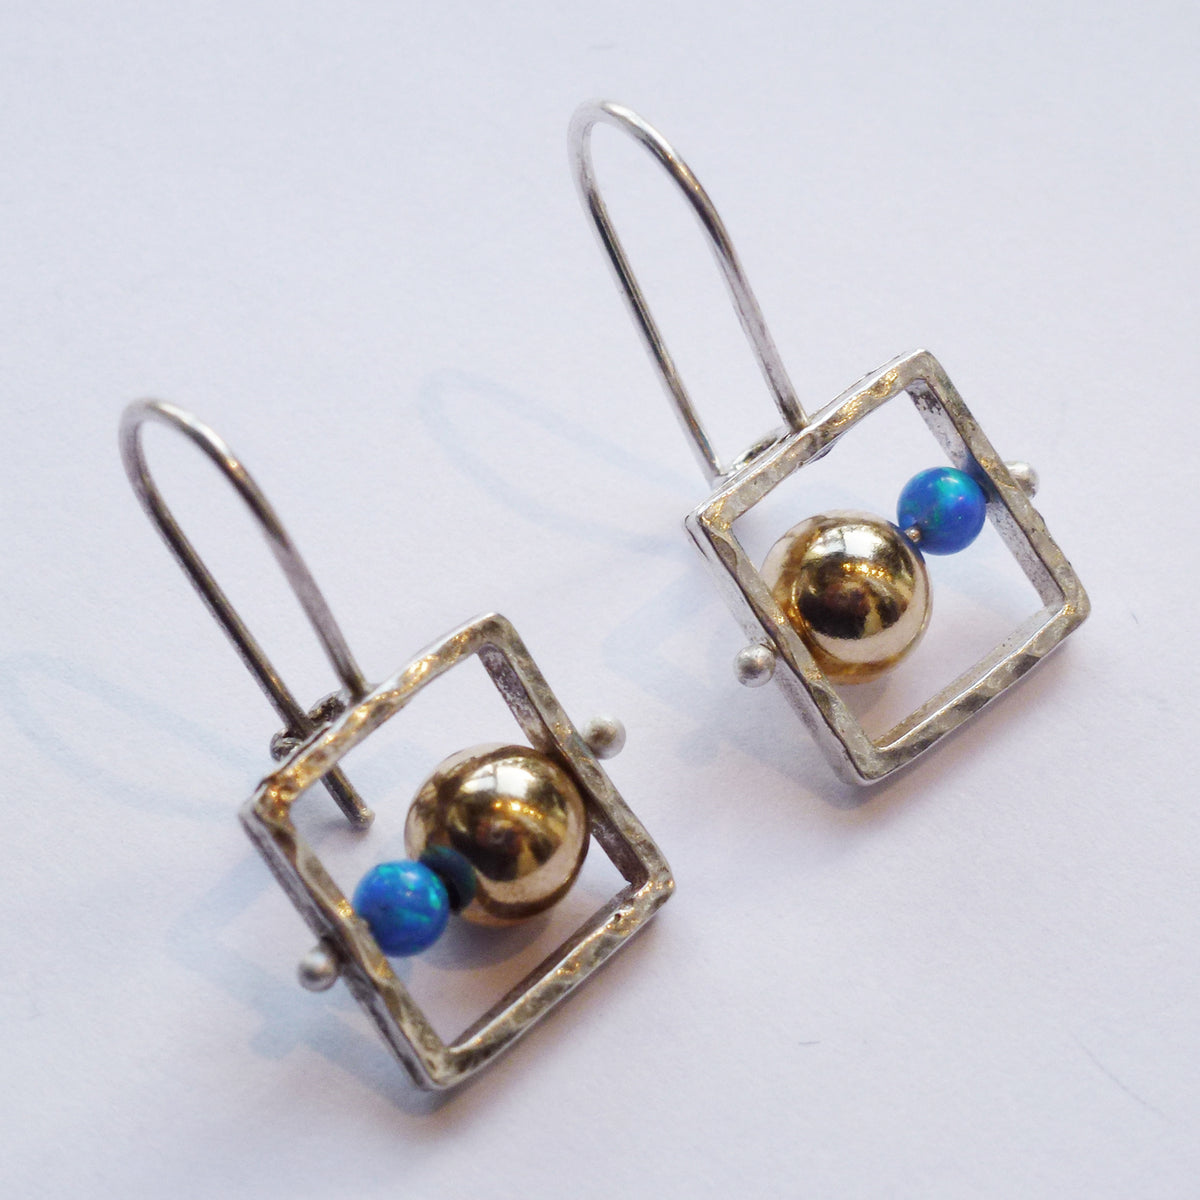 Yair Stern - Short Square Earrings with Blue and Gold Beads